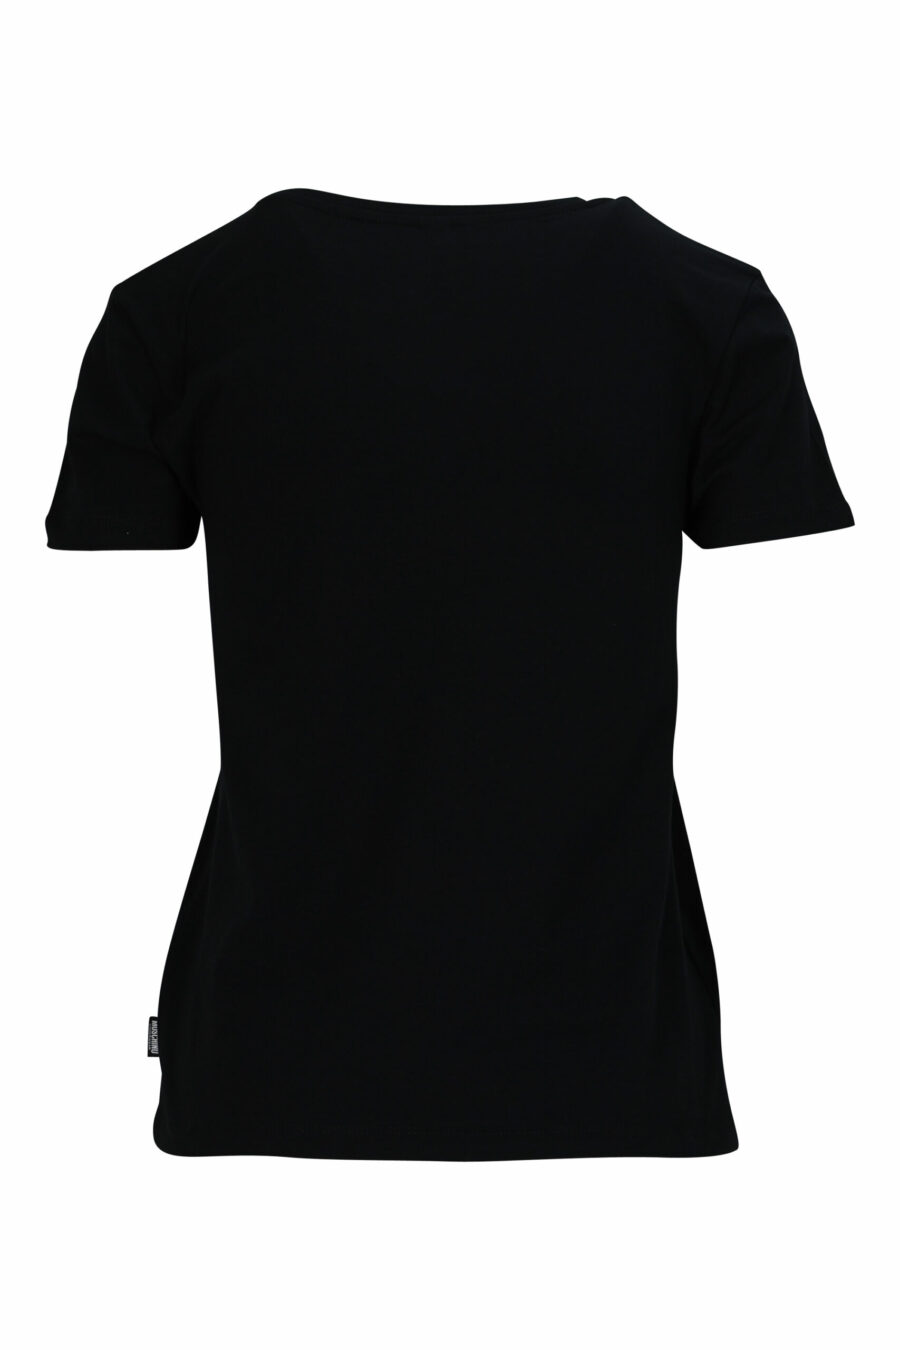 Black T-shirt with bear logo "underbear" patch - 667113697376 1 scaled